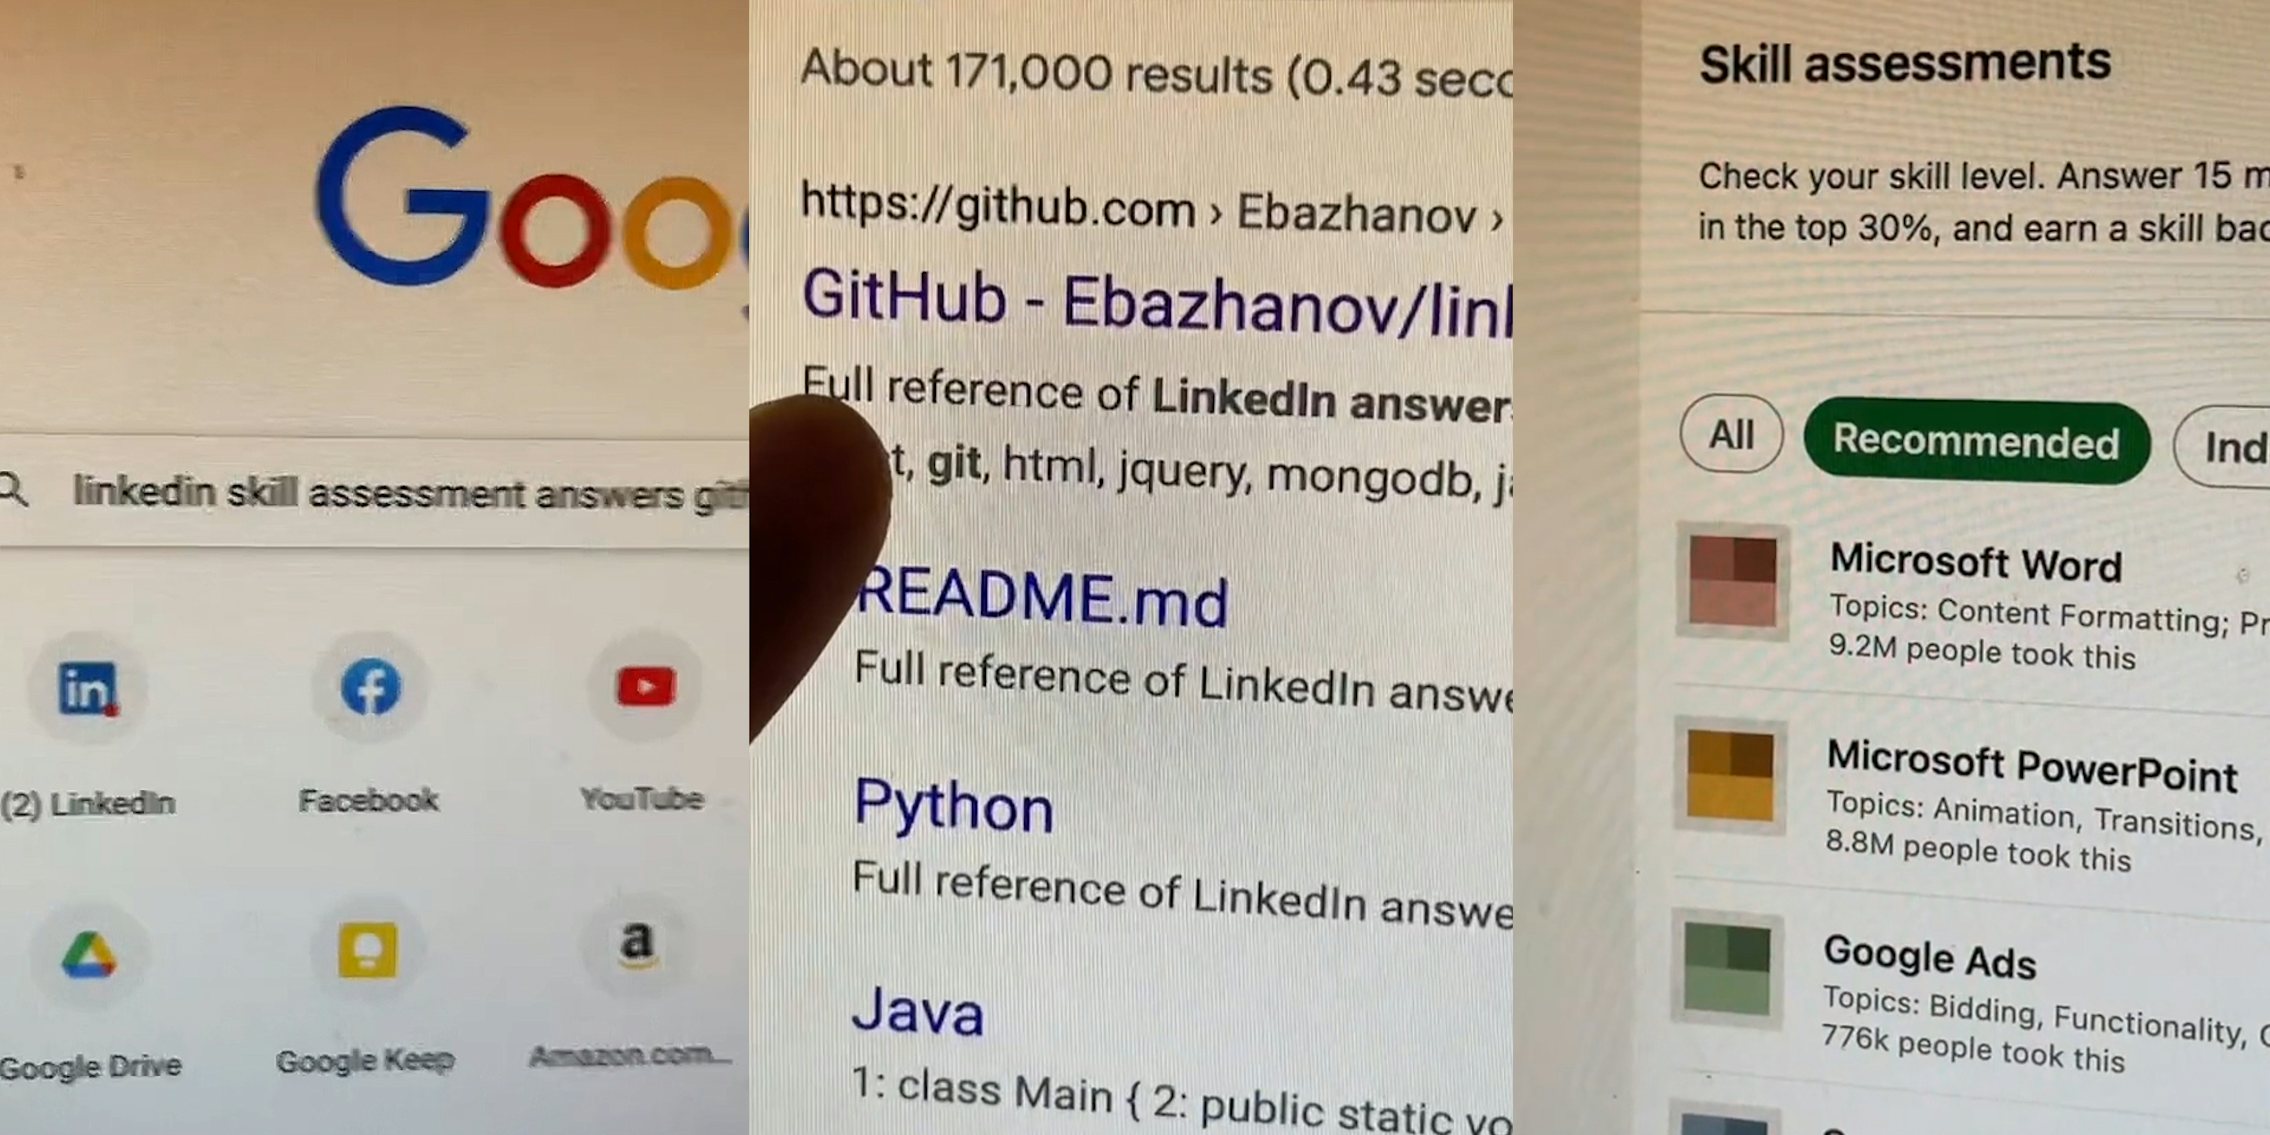 screen with Google search 'linkedin skill assessment answers github' (l) finger pointing at screen with search results 'GitHub - Ebazhanov/linkedin' (c) Skill assessments 'Check your skill level. Answer 15.. in the top 30%, and earn a skill... Recommended Microsoft Word Microsoft PowerPoint Google Ads' (r)